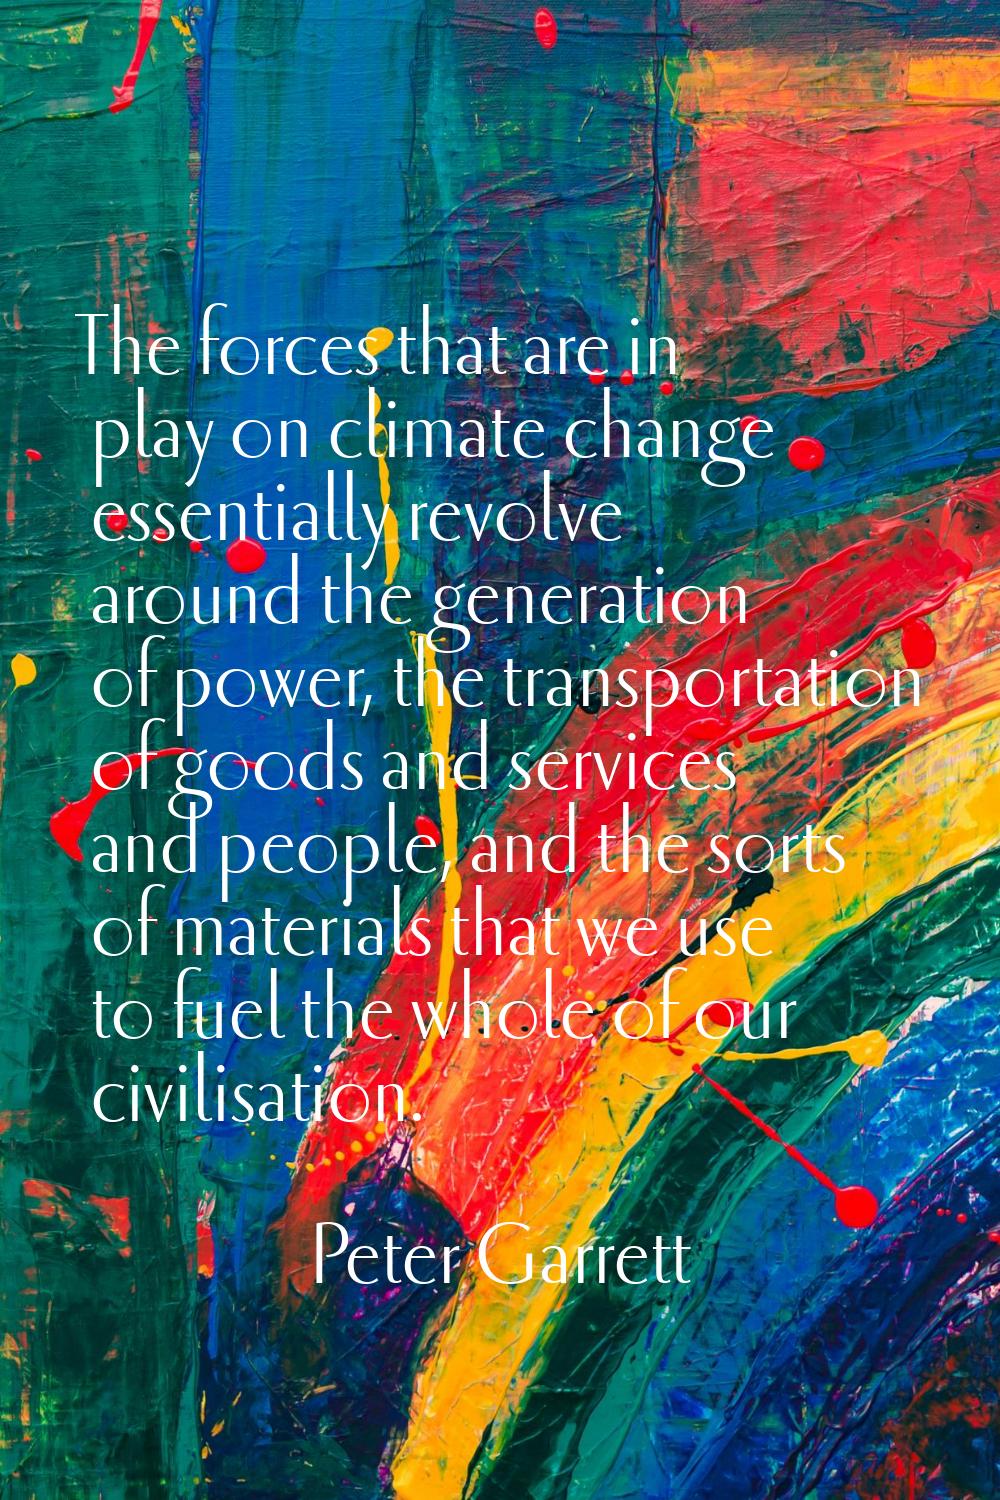 The forces that are in play on climate change essentially revolve around the generation of power, t